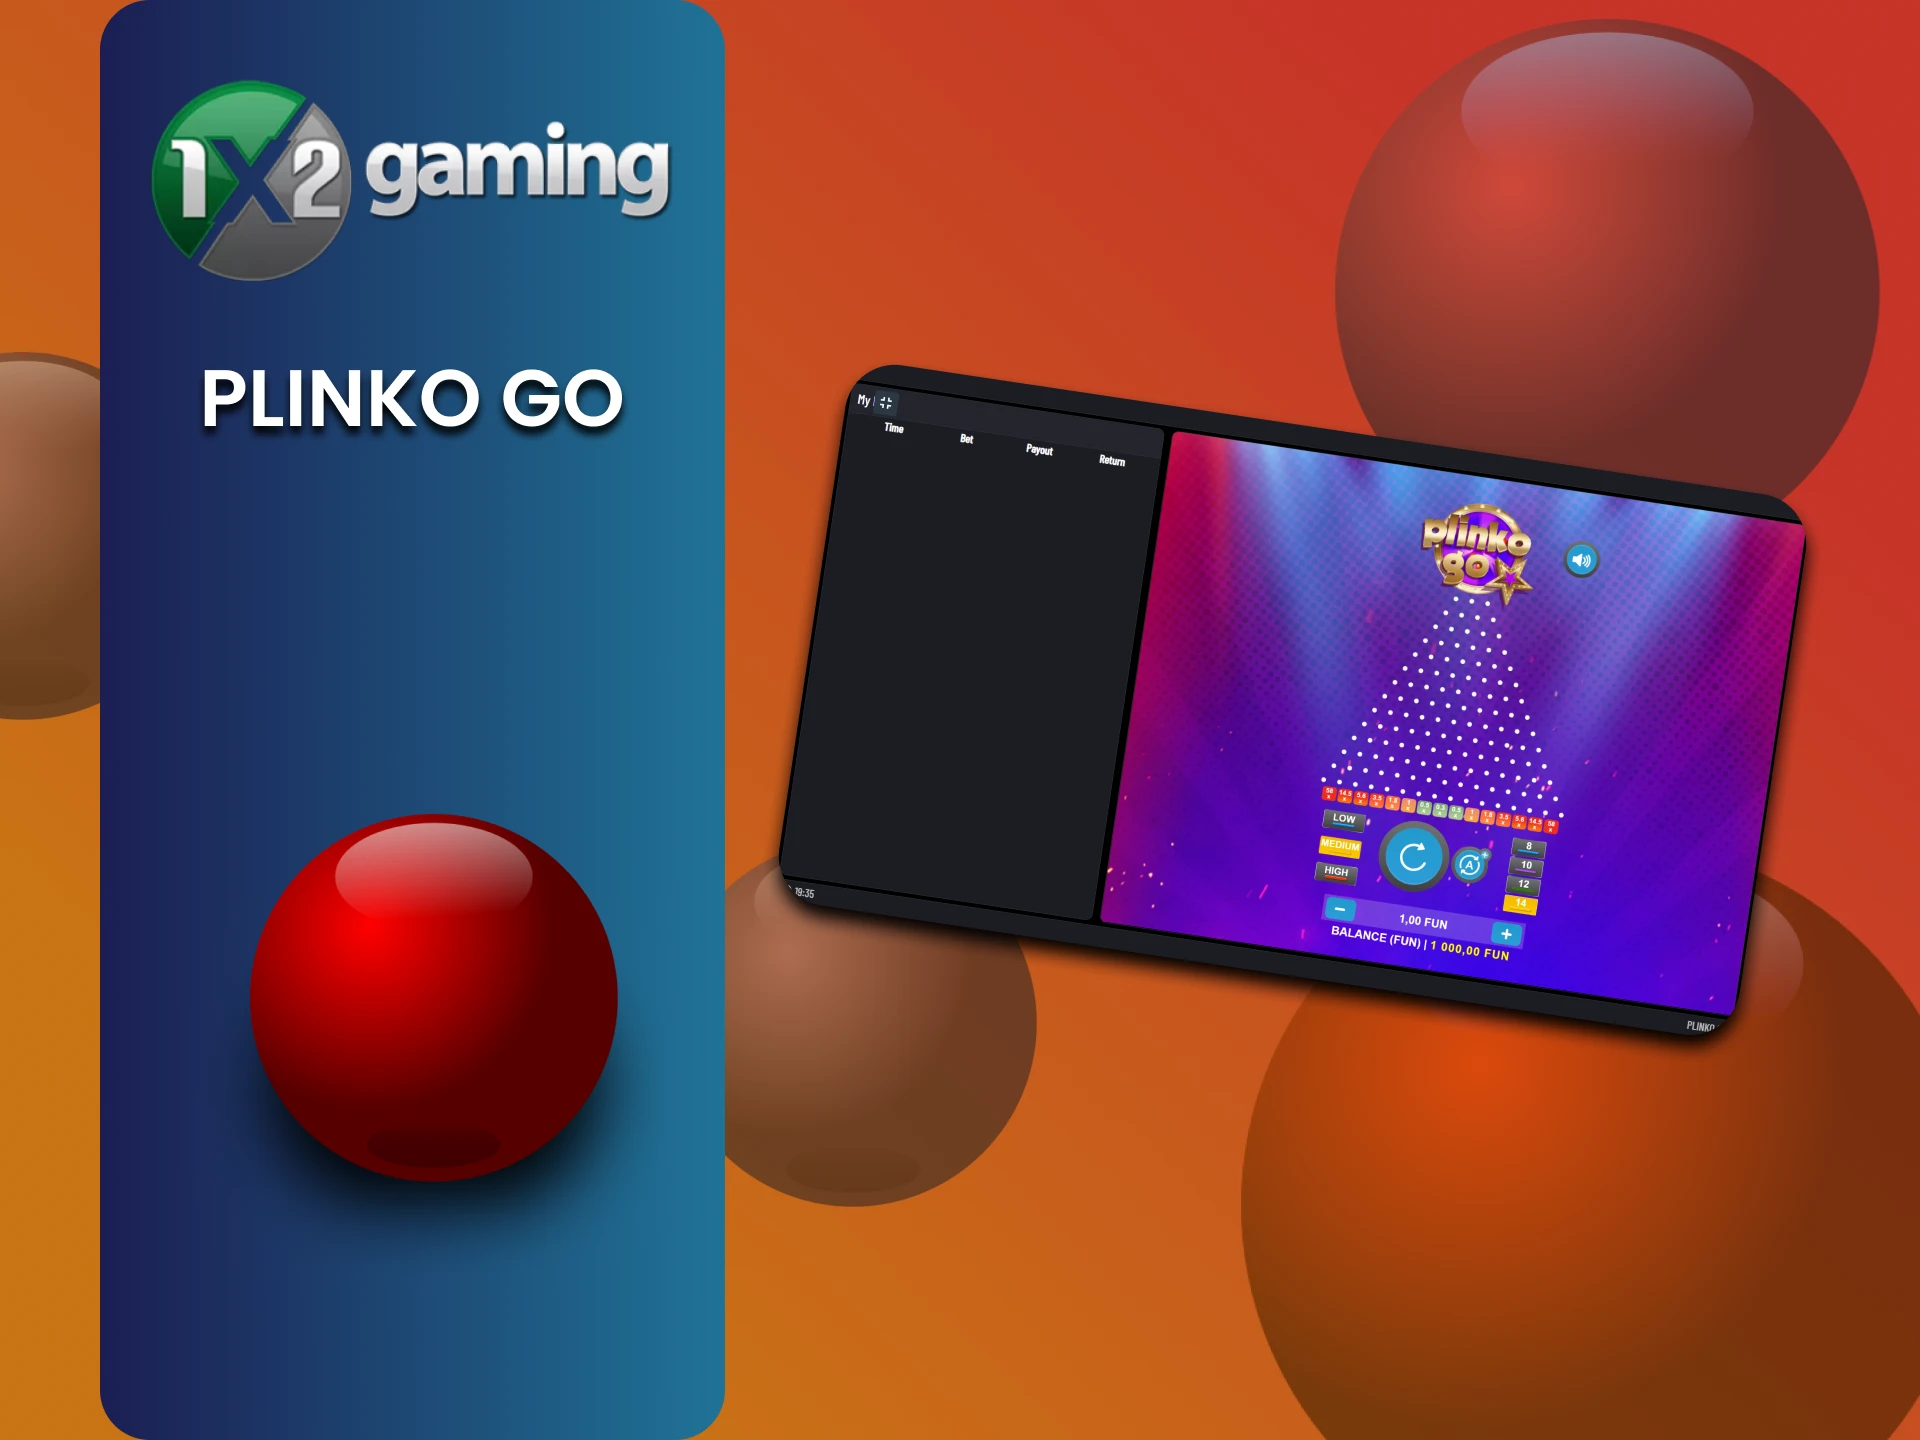 Play Plinko GO from 1x2 gaming.